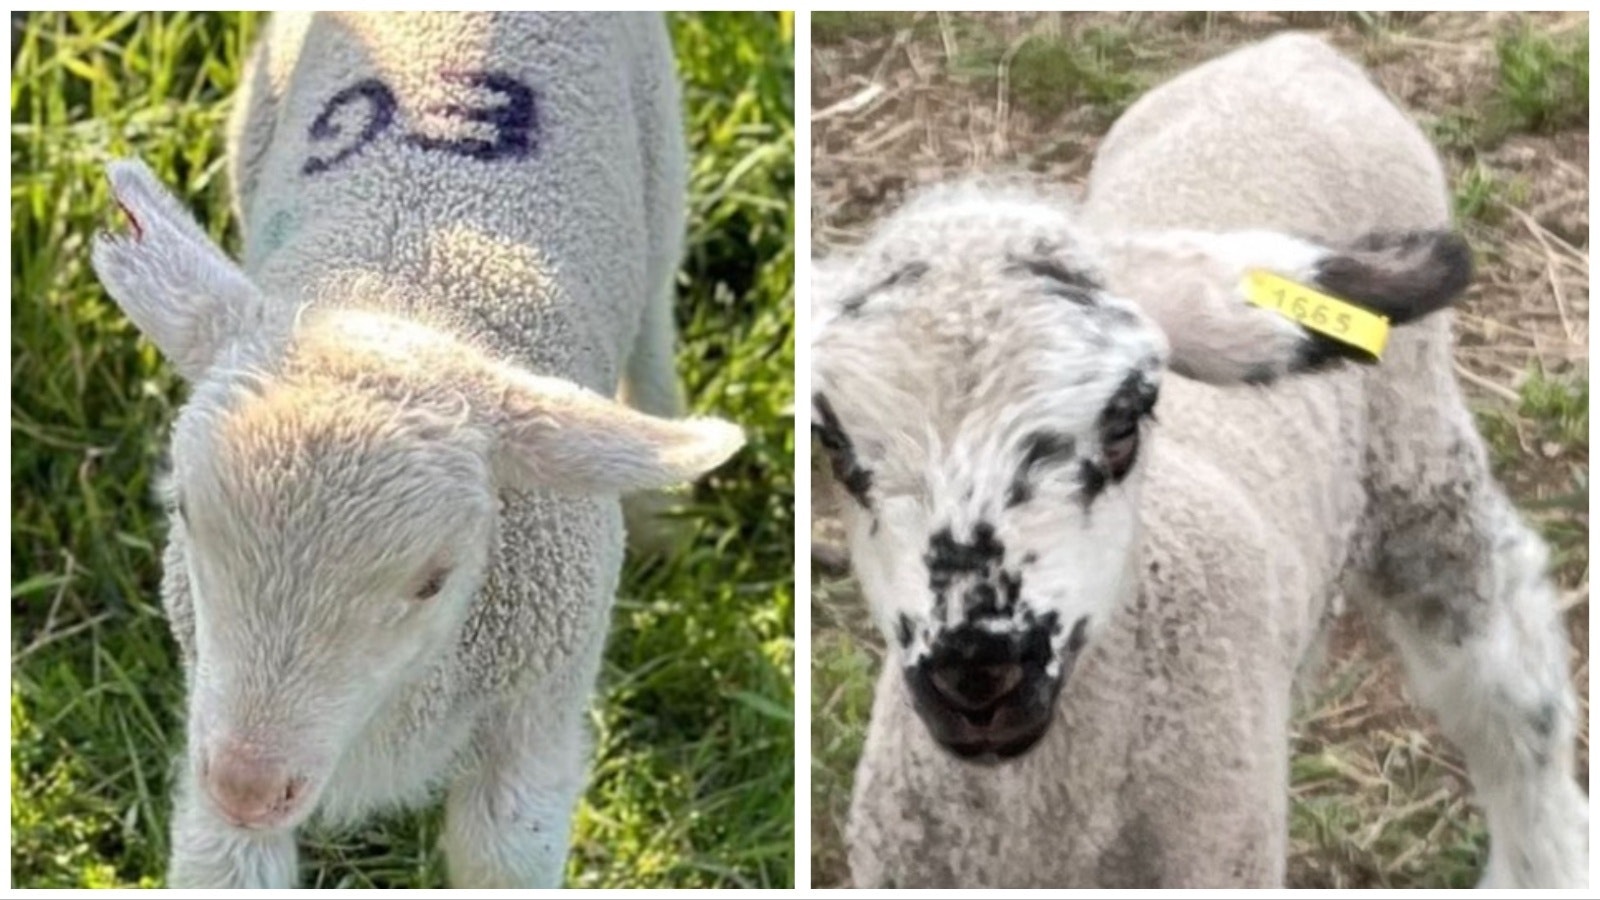 About 70 sheep with a “GE” brand on their backs are missing from a Campbell County ranch (left). Many of them have a cropped ear (right).